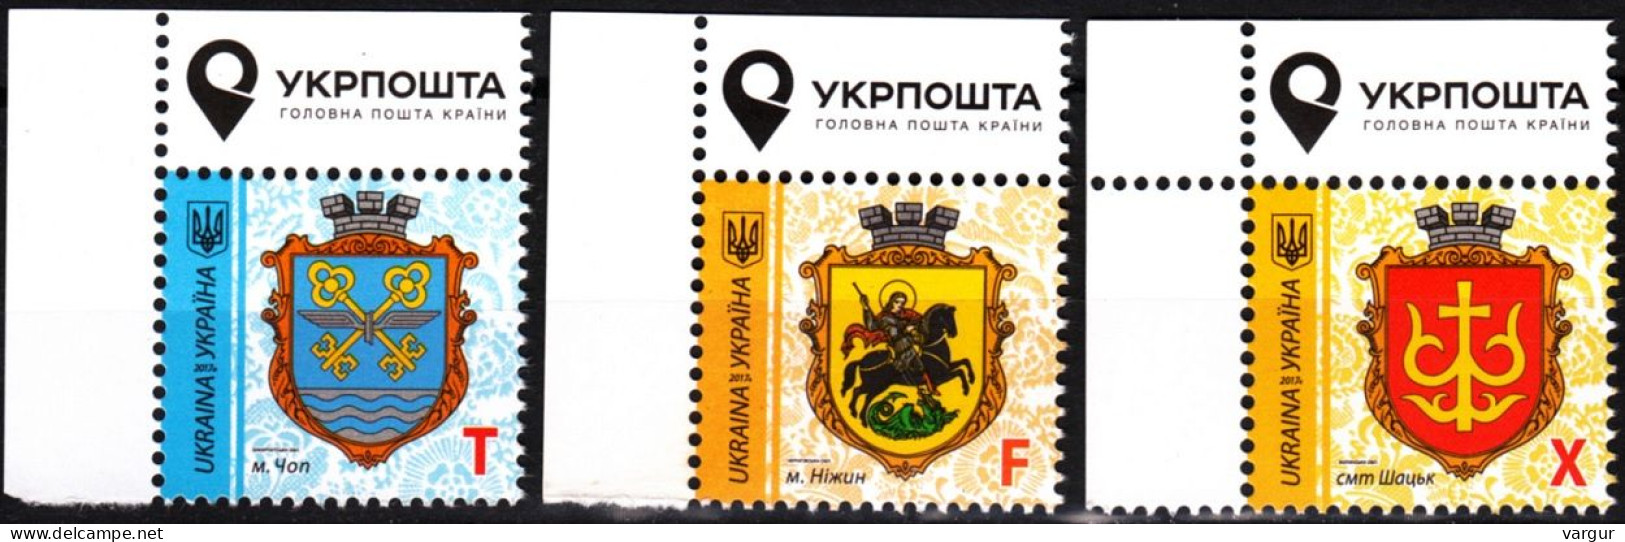 UKRAINE 2017 Definitive: Heraldry. Town Arms. Reprints. Issues #6-7, 3v. UL Corner, MNH - Timbres